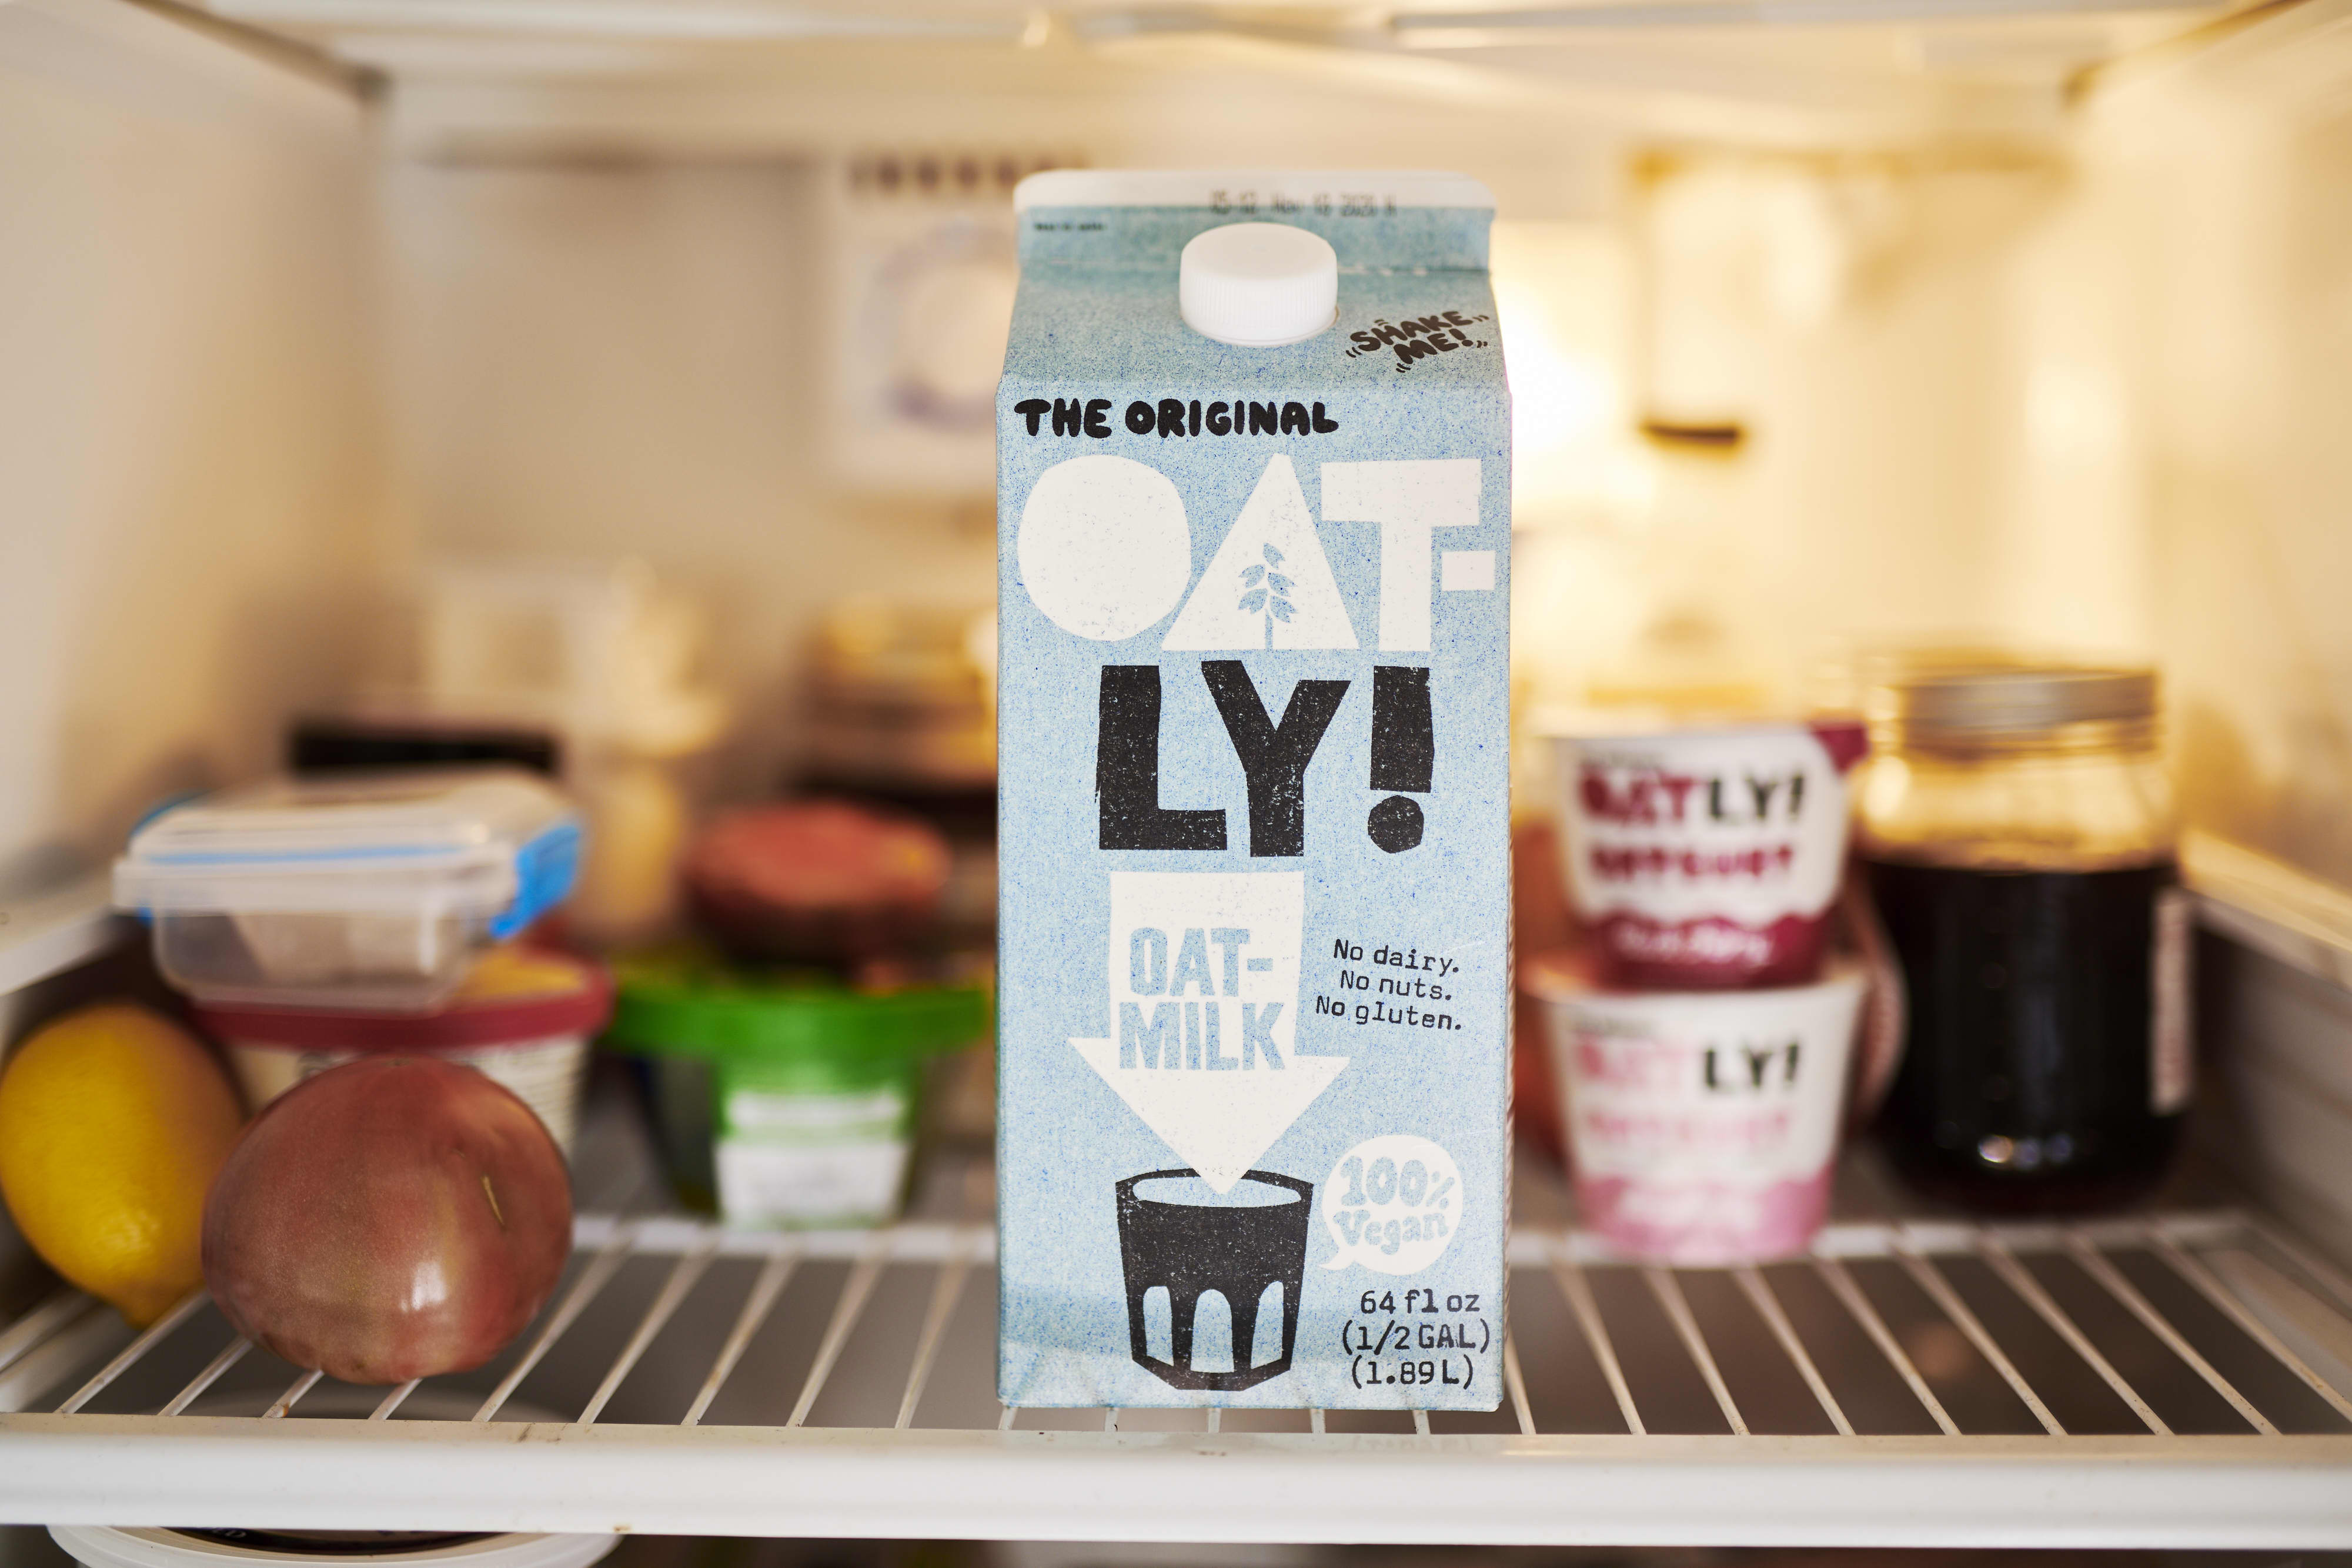 Credit Suisse downgrades Oatly, cites greater consumer risk in Europe and Asia